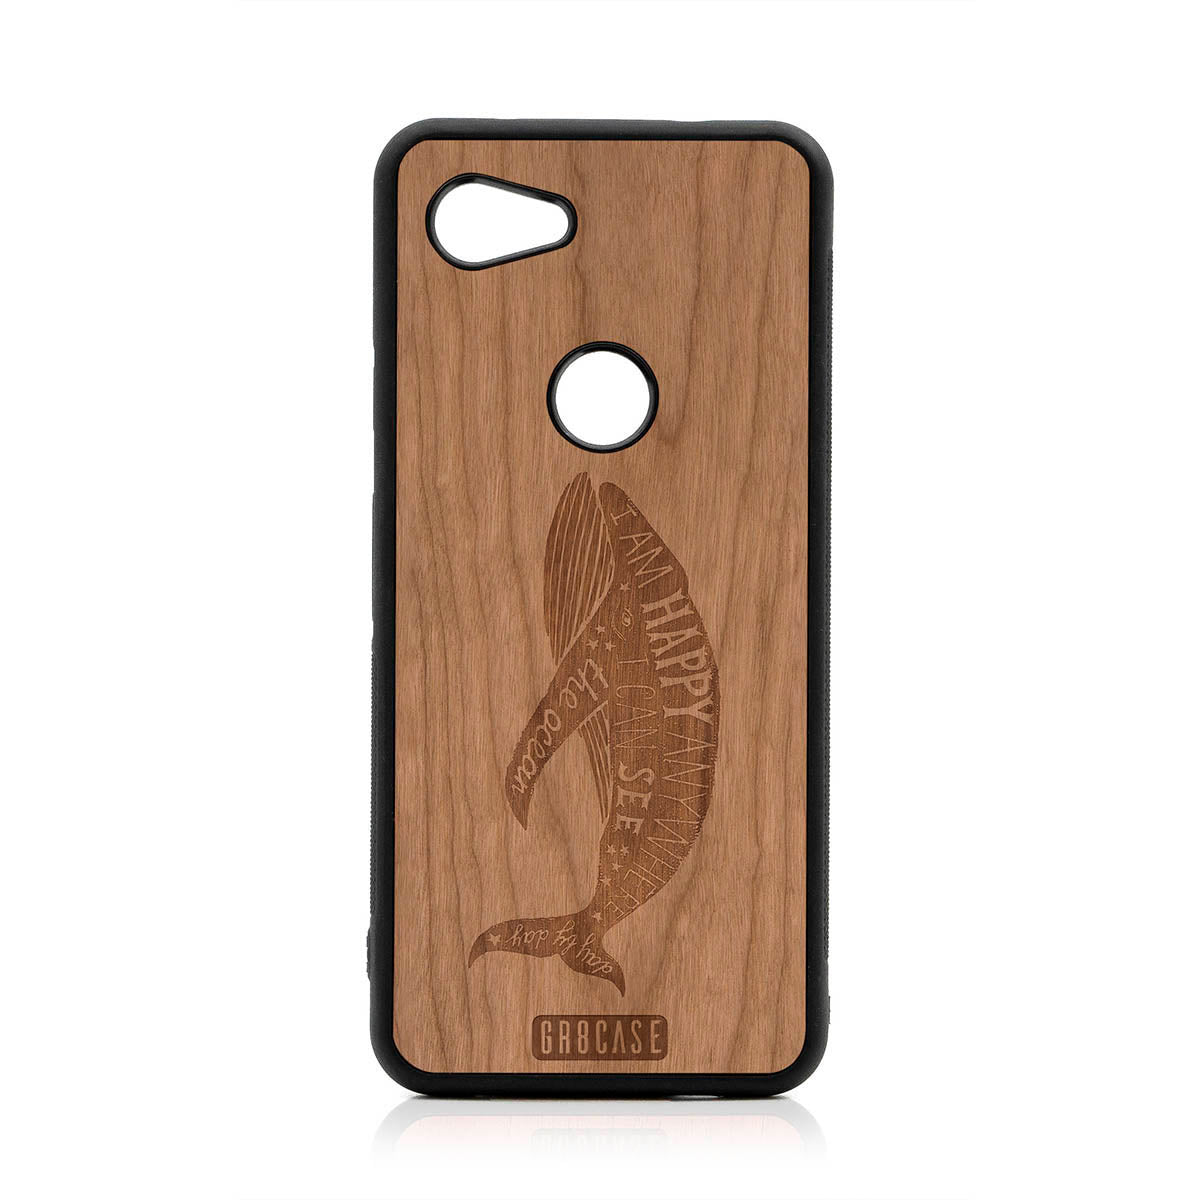 I'm Happy Anywhere I Can See The Ocean (Whale) Design Wood Case For Google Pixel 3A XL